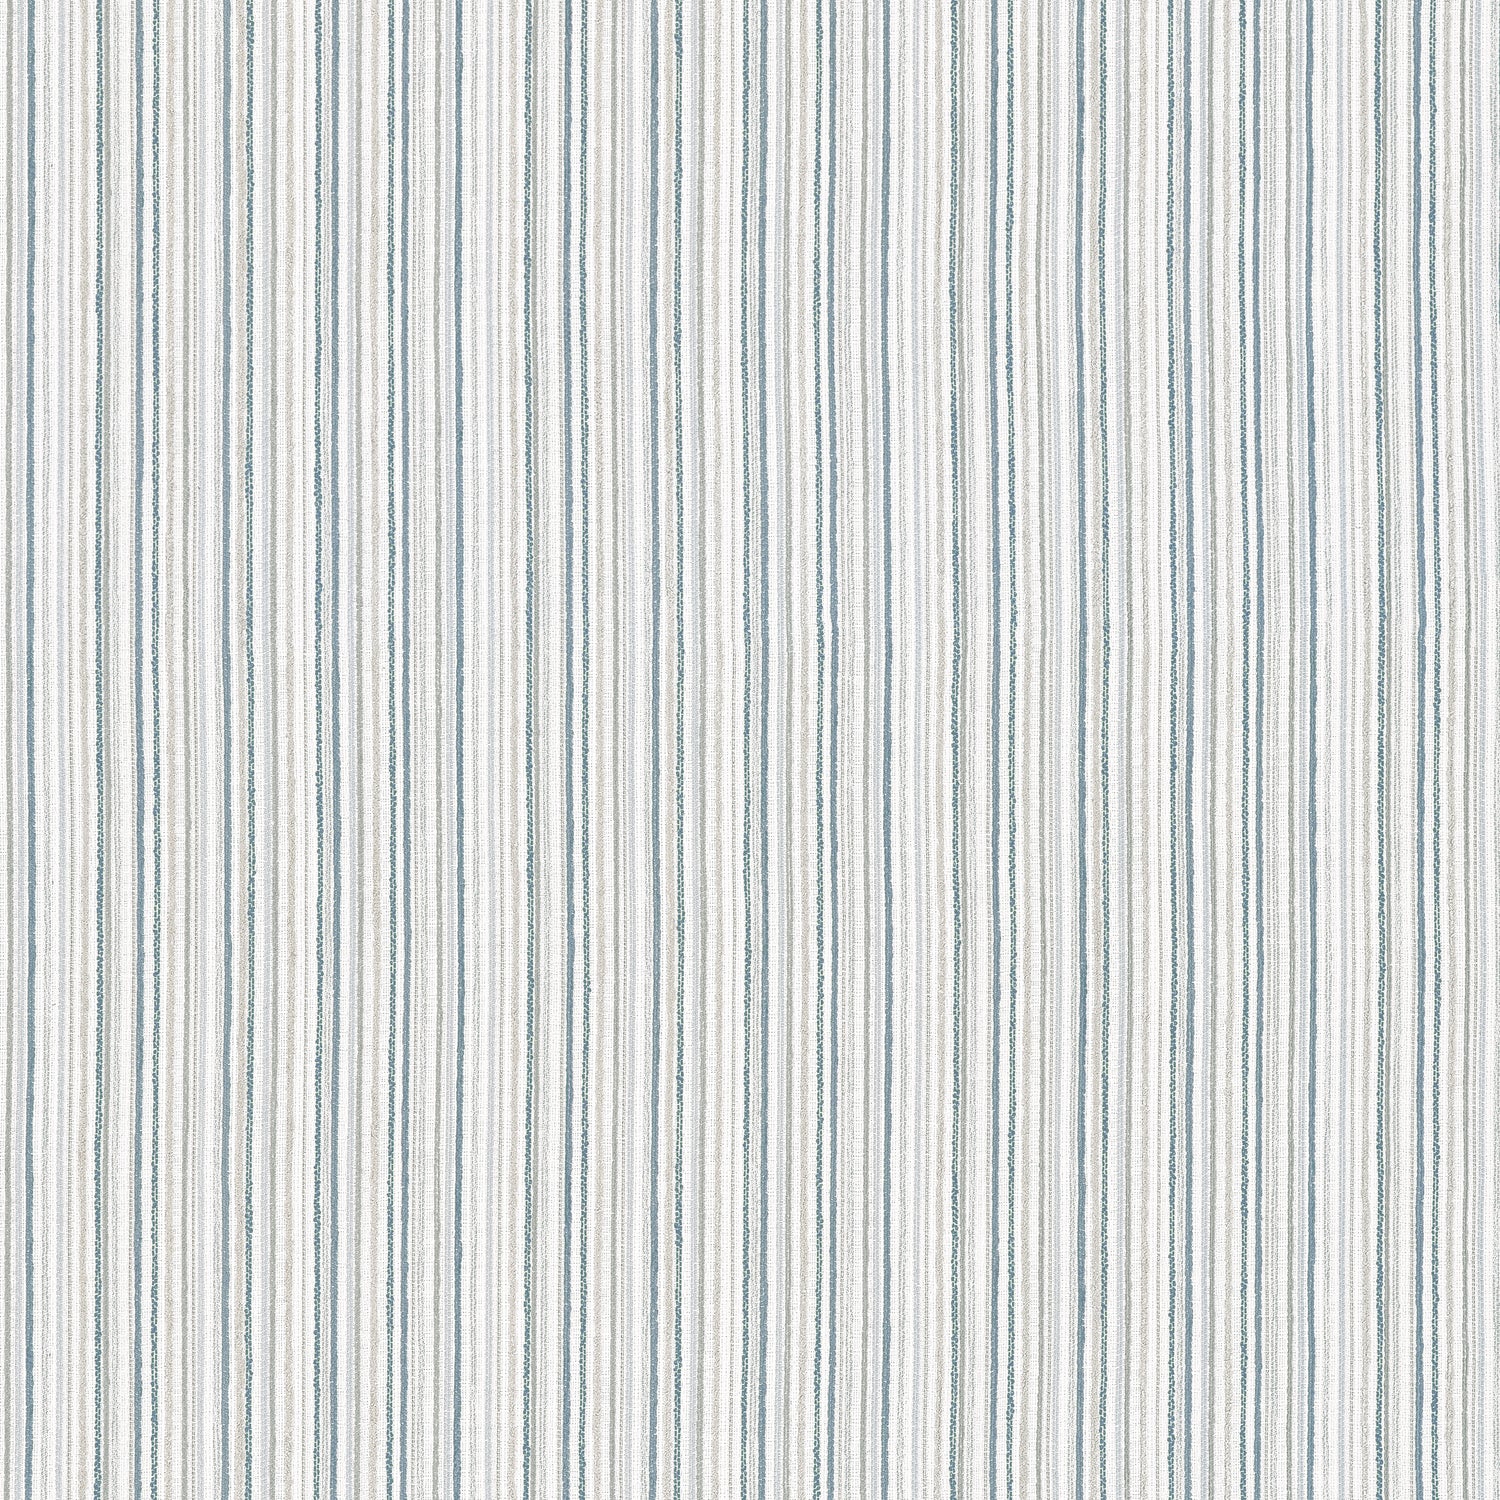 Ernie Stripe fabric in true blue color - pattern number W81944 - by Thibaut in the Companions collection